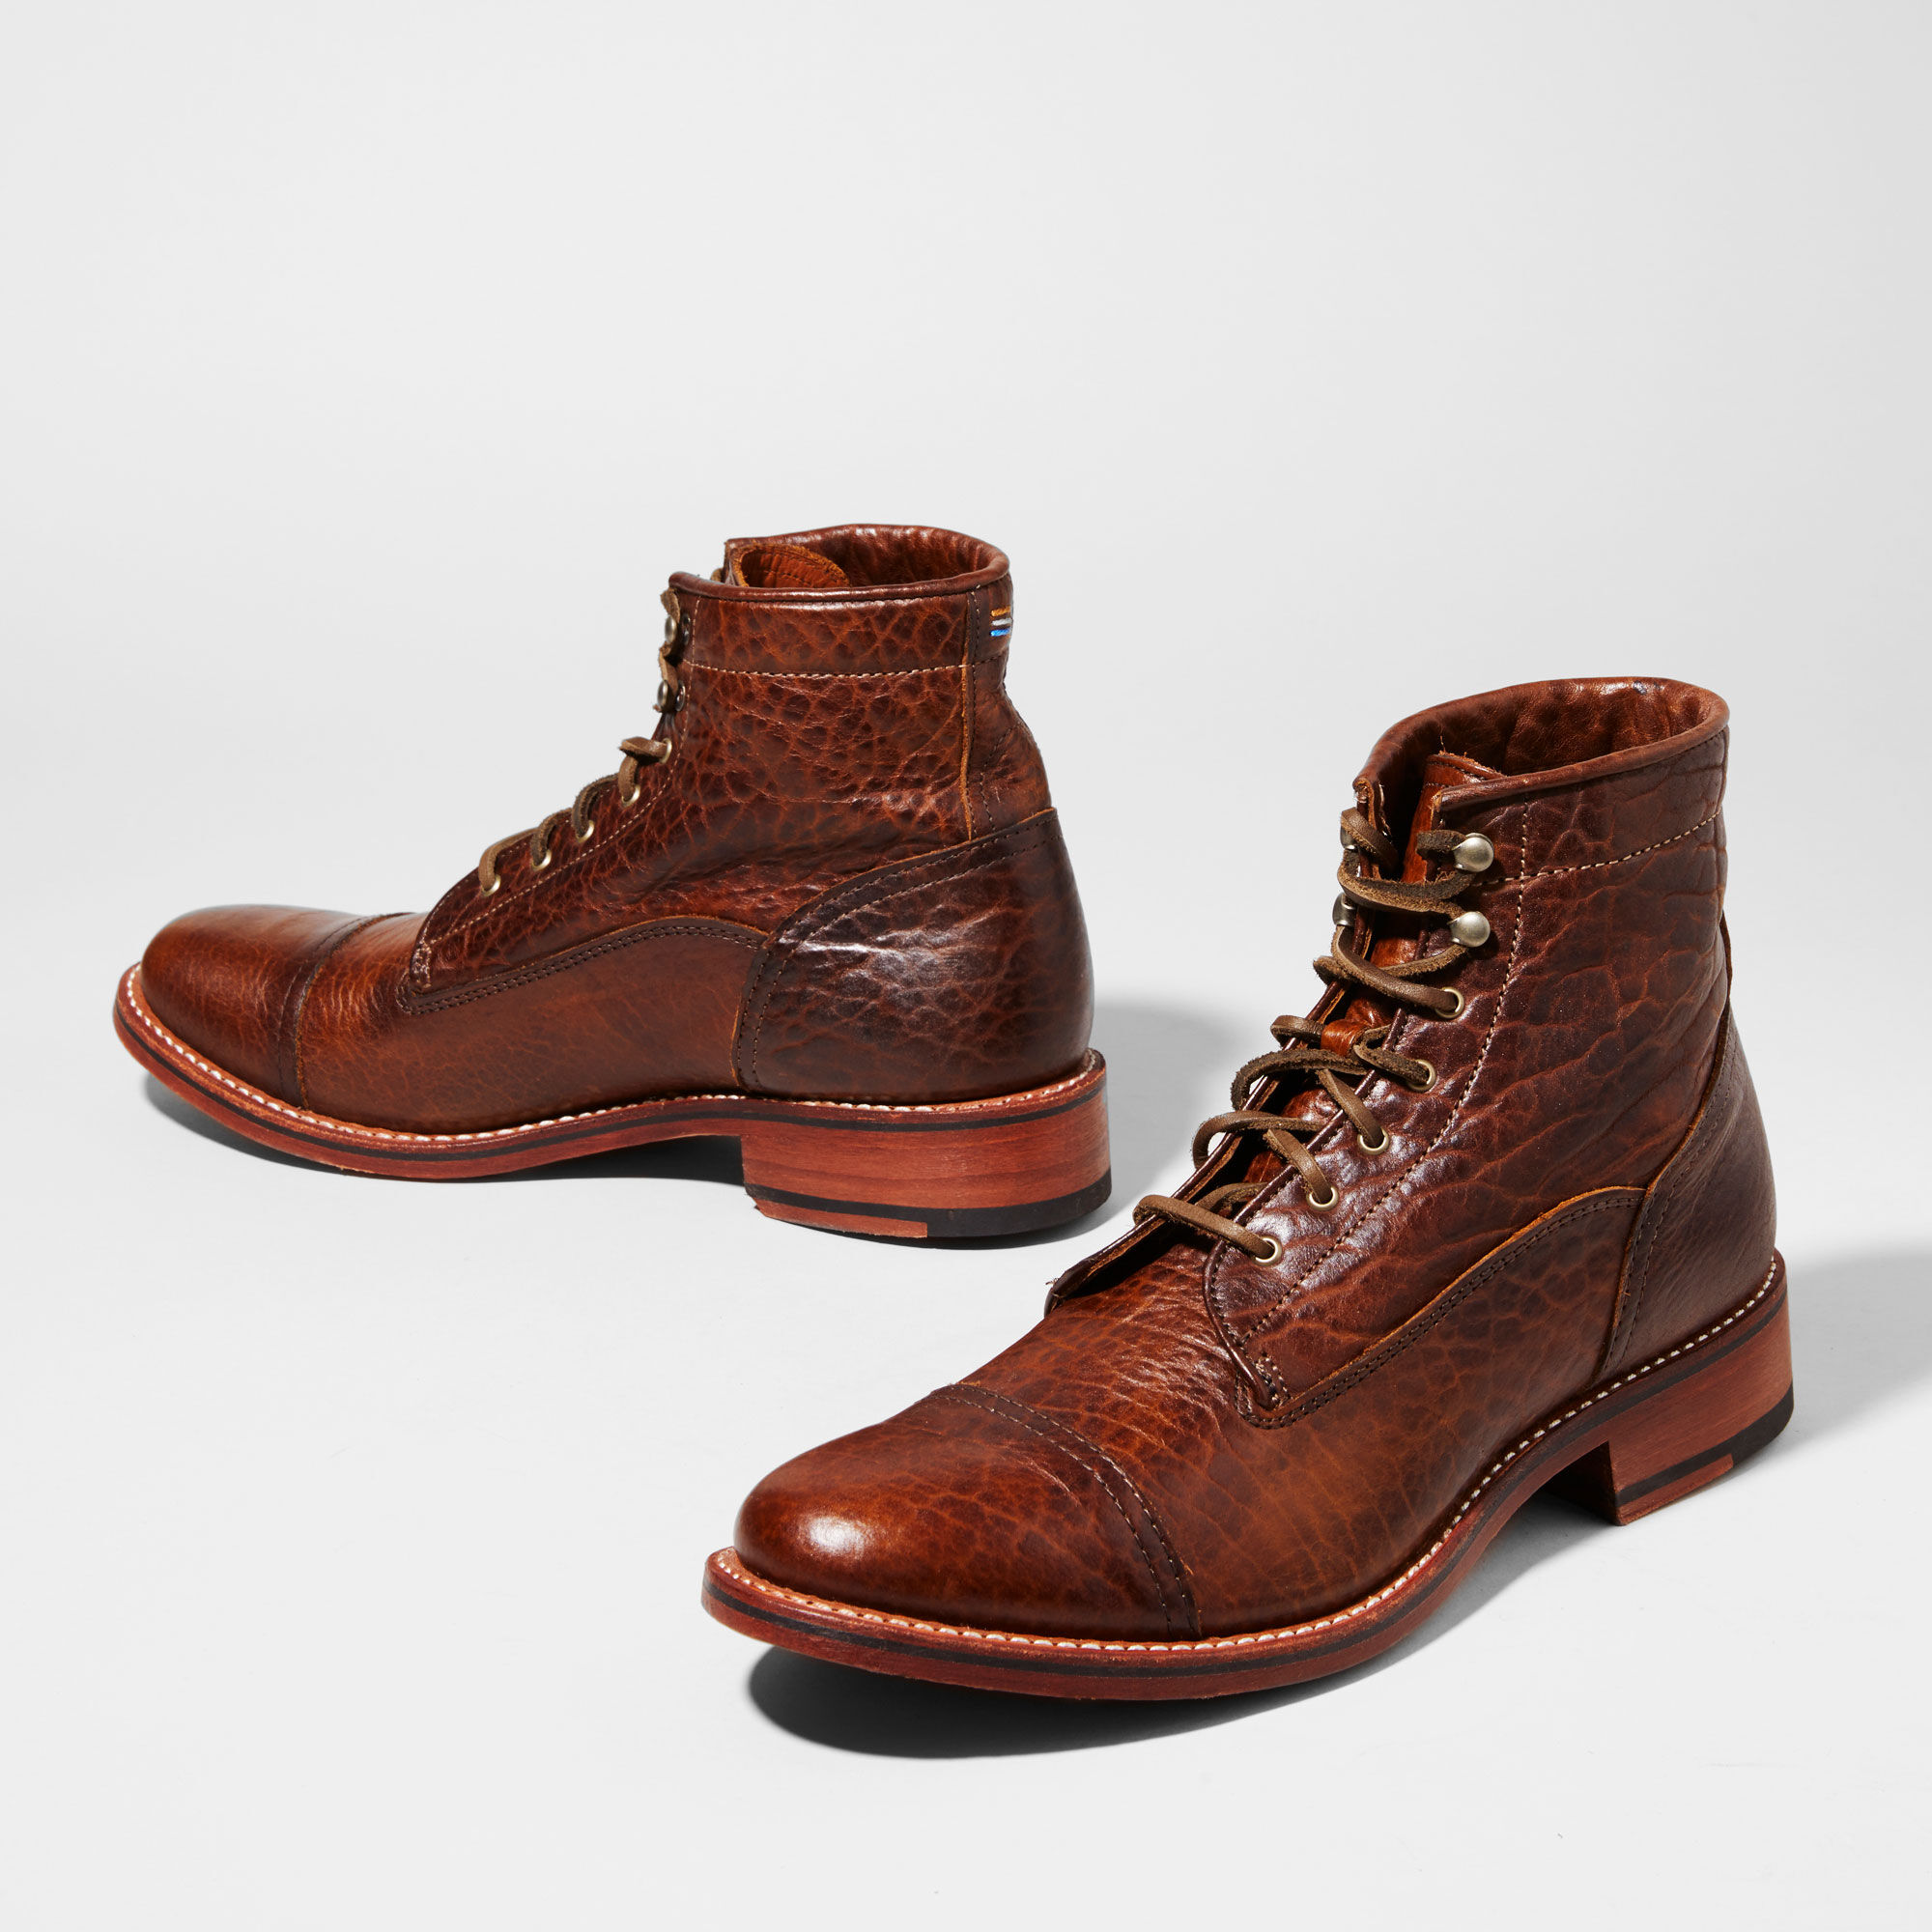 Highlands: Men's Lace Up Leather Boots 